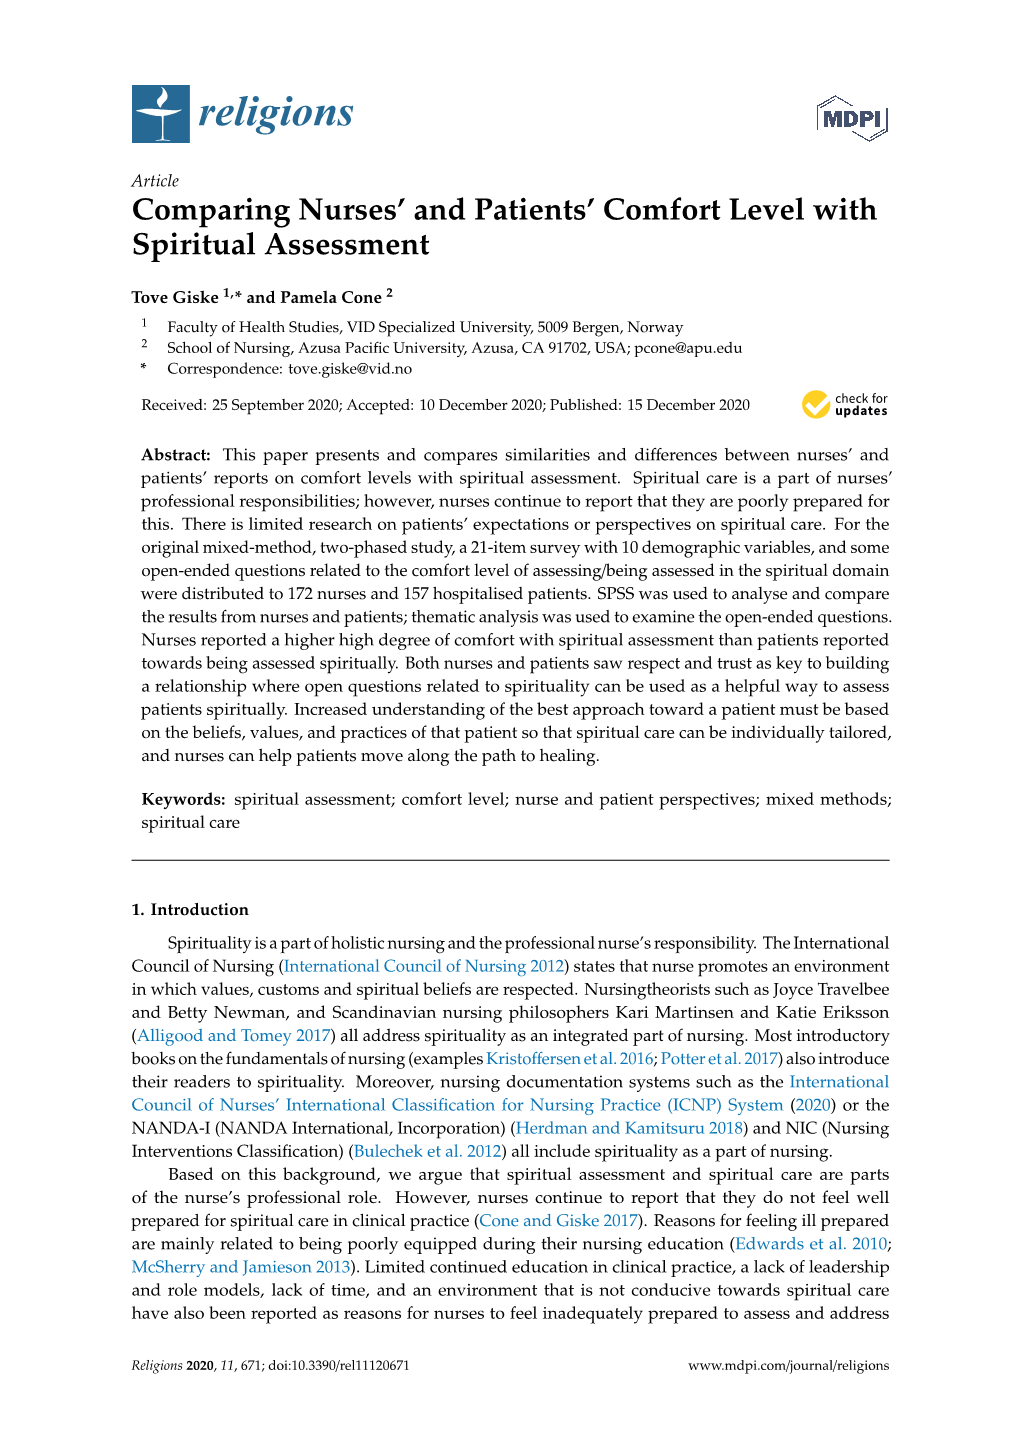 Comparing Nurses' and Patients' Comfort Level with Spiritual Assessment